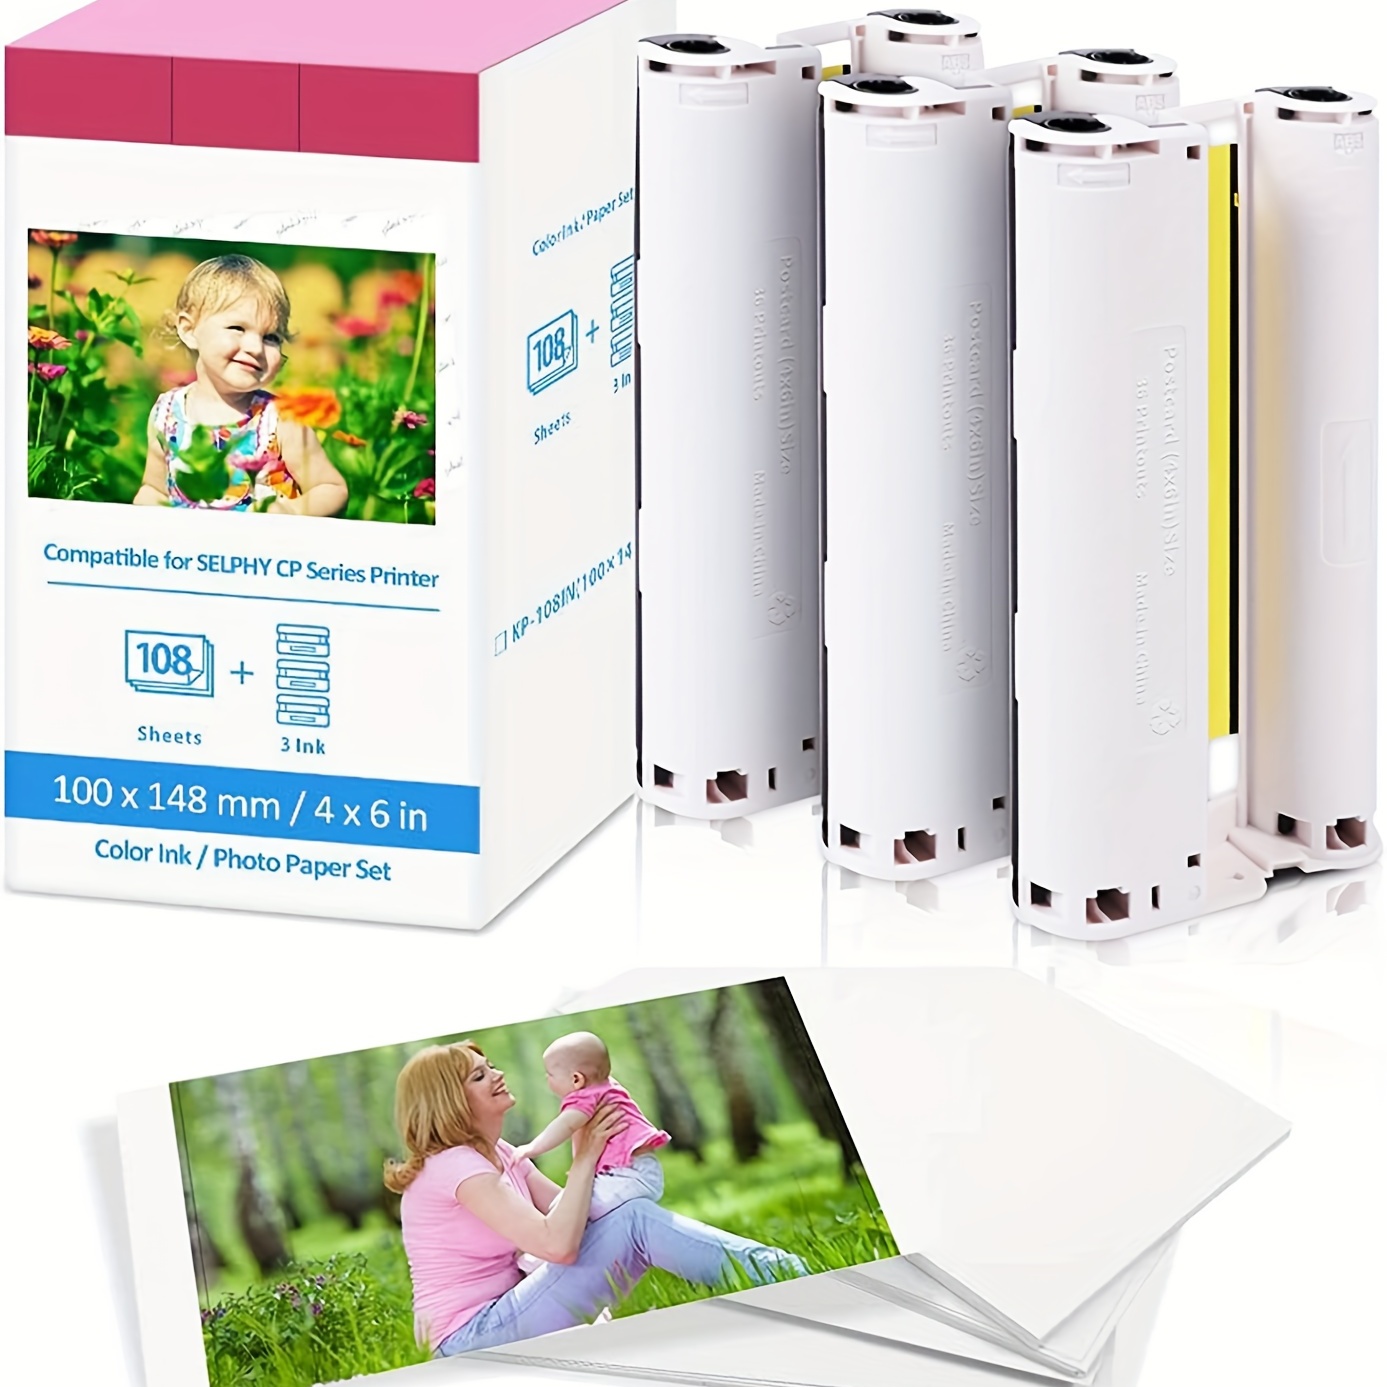 Ink & Photo Paper Compatible Canon Selphy CP1300 CP1500 CP1200 Printer  KP-108IN 10x15cm 6' x4' 108 Sheets 3 Colour Ink Cassette - AliExpress